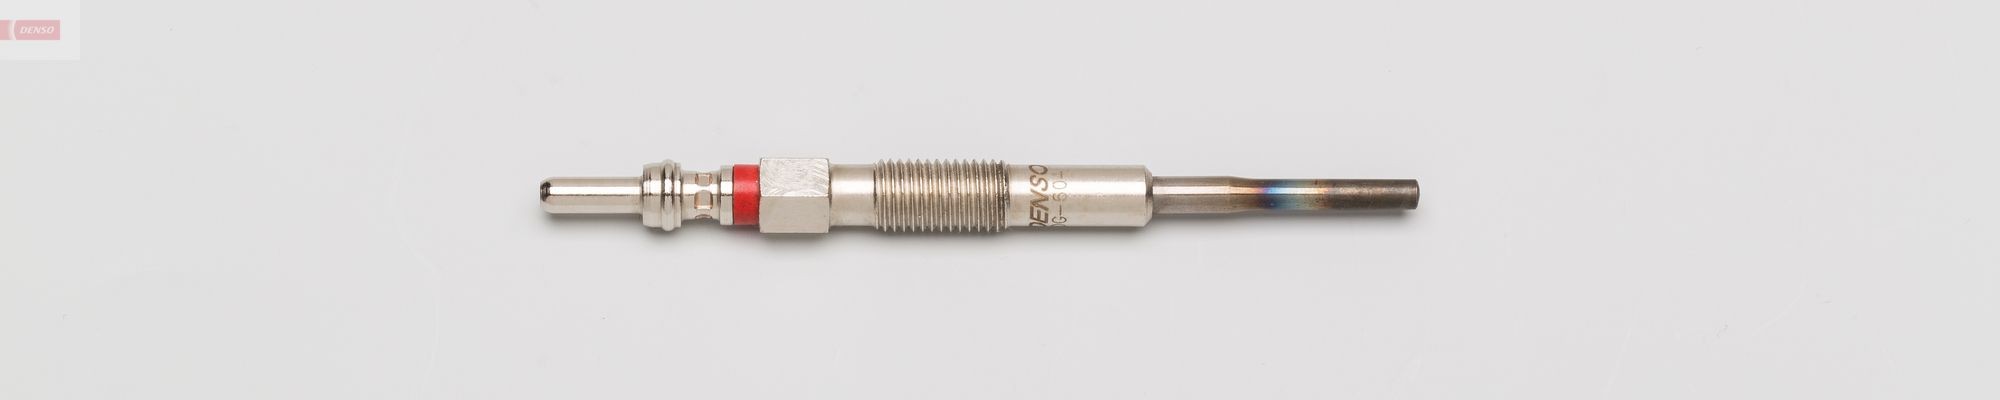 Great value for money - DENSO Glow plug DG-604